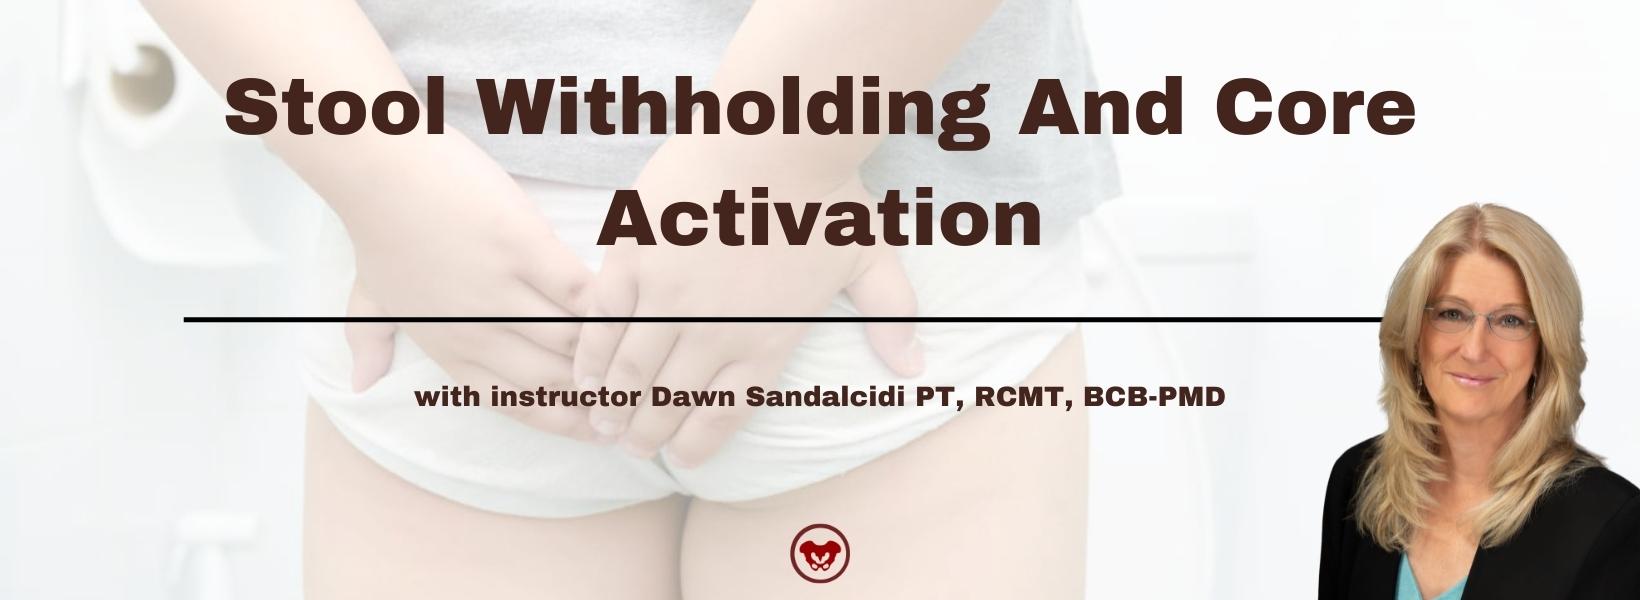 Stool Withholding And Core Activation